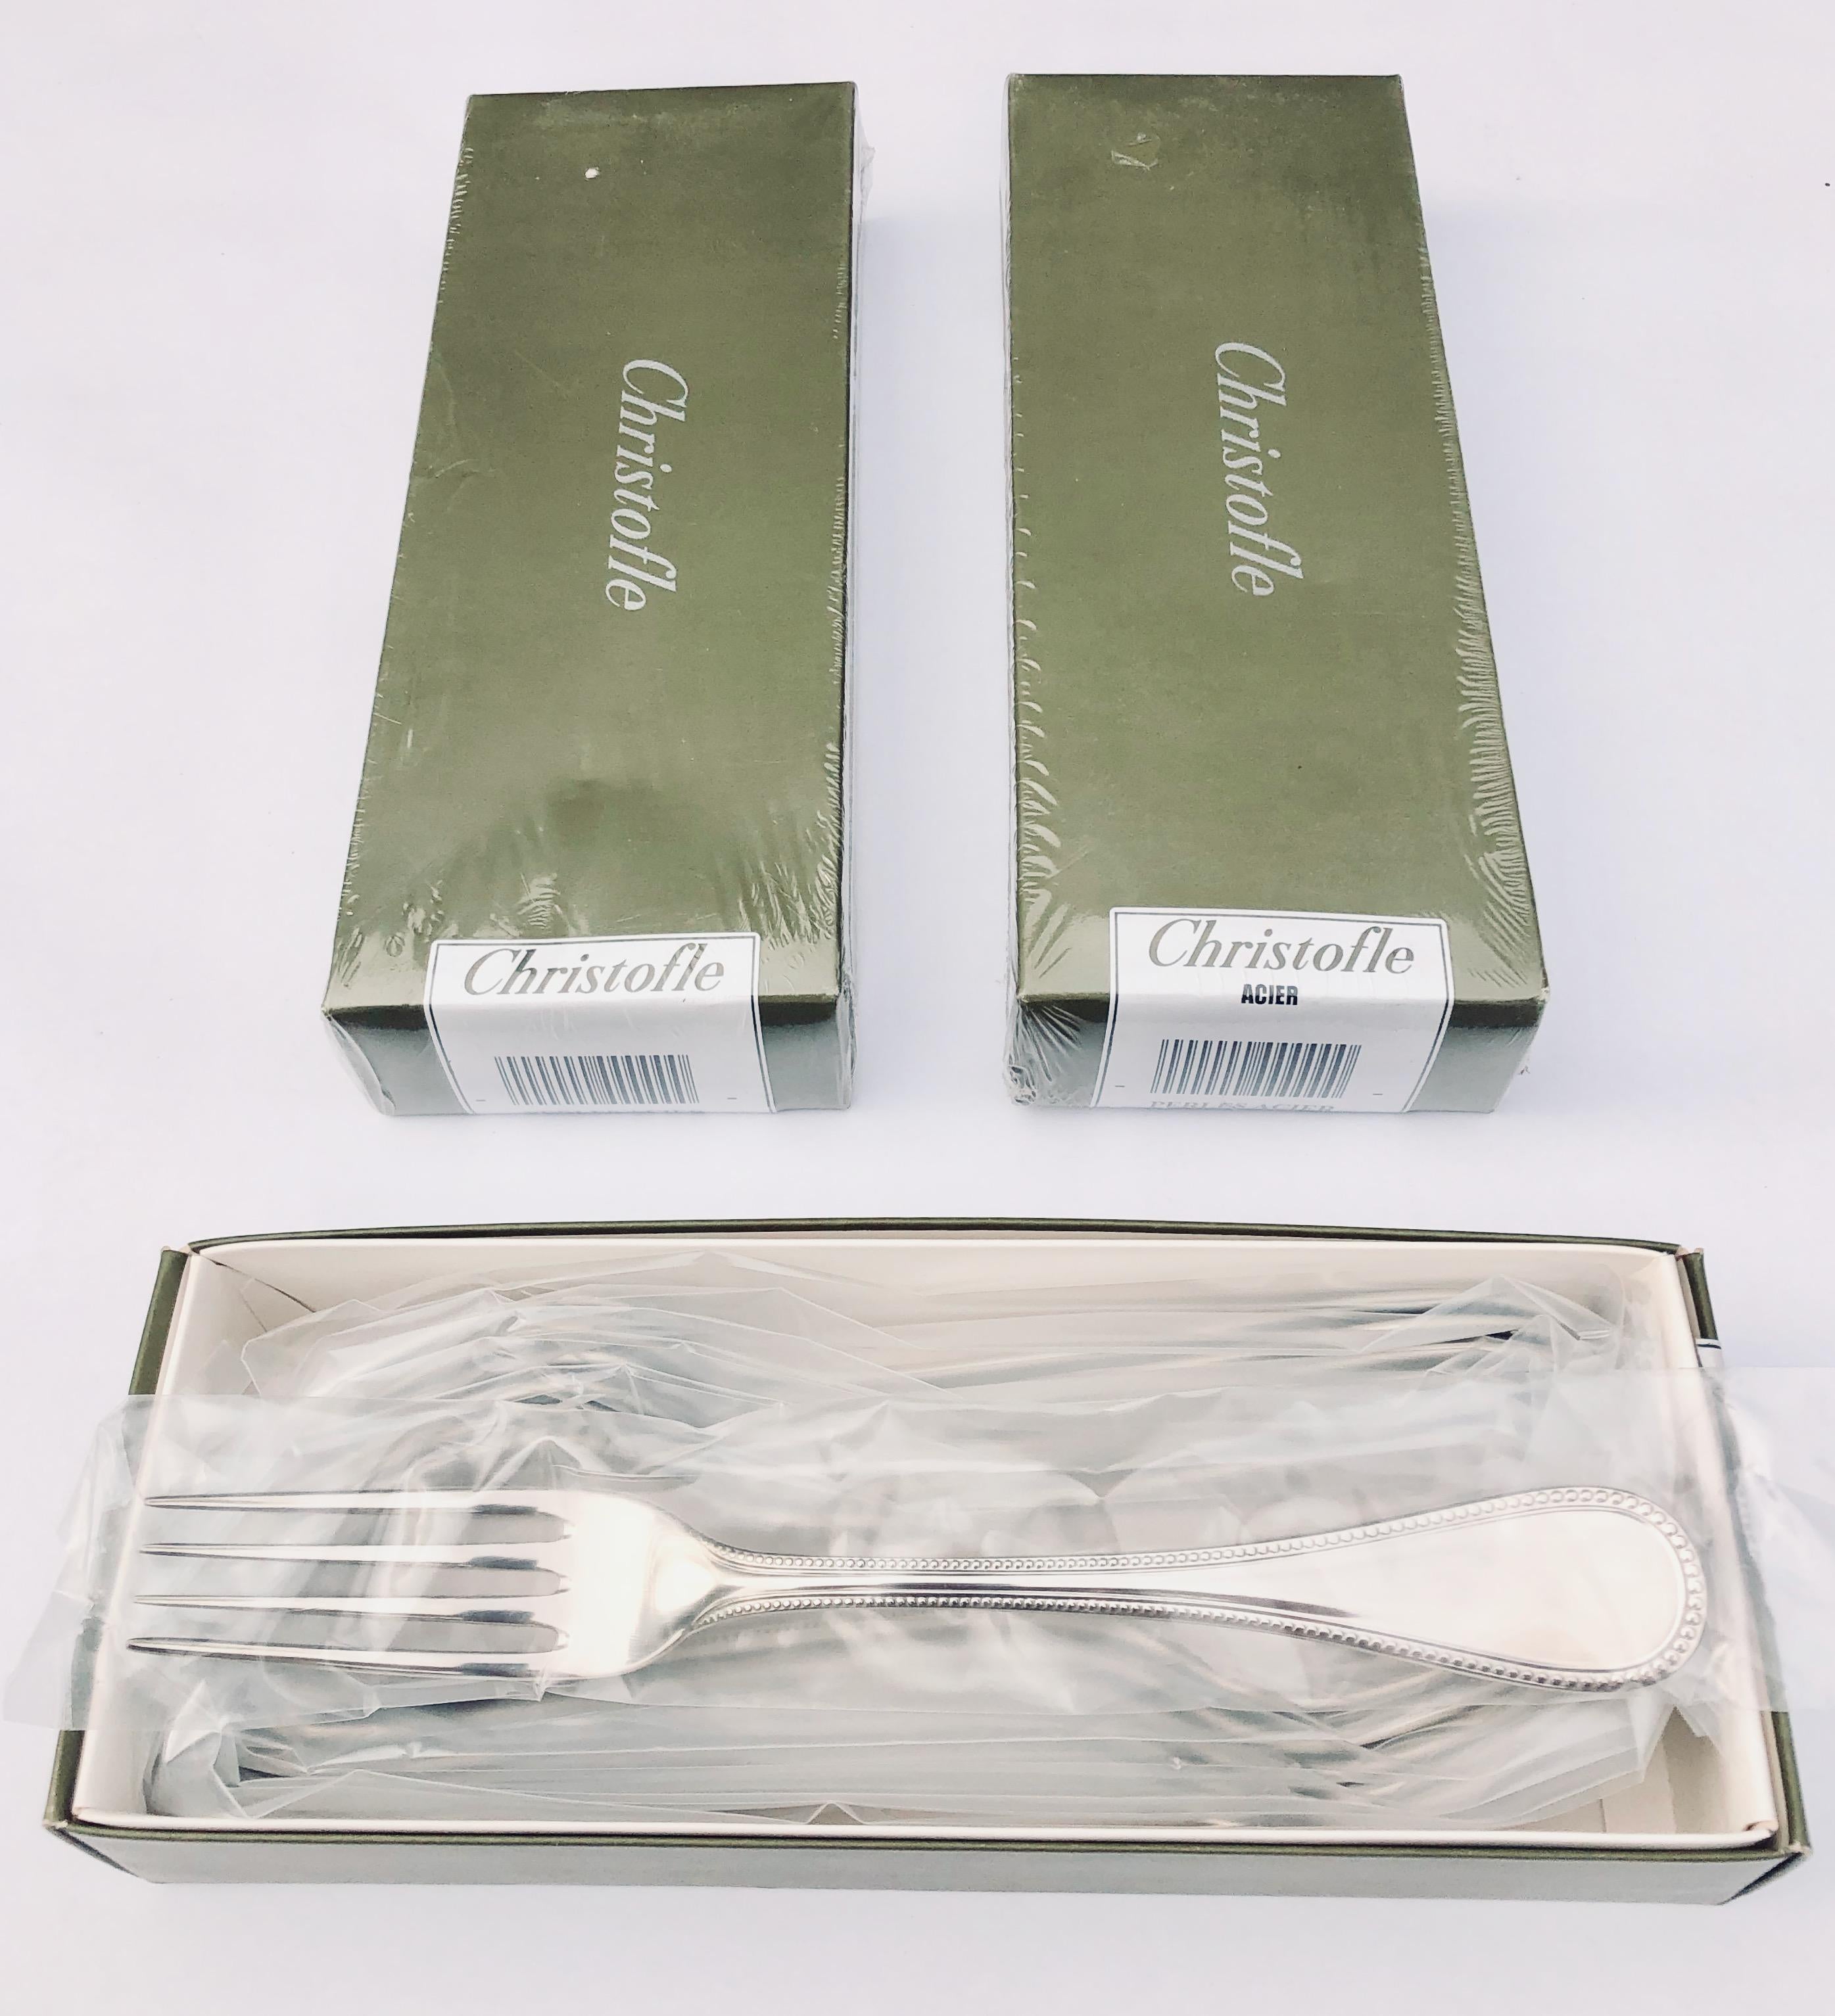 Christofle Stainless Steel Perles 162-Piece Dinner Set, New in Original Boxes In Excellent Condition For Sale In Petaluma, CA